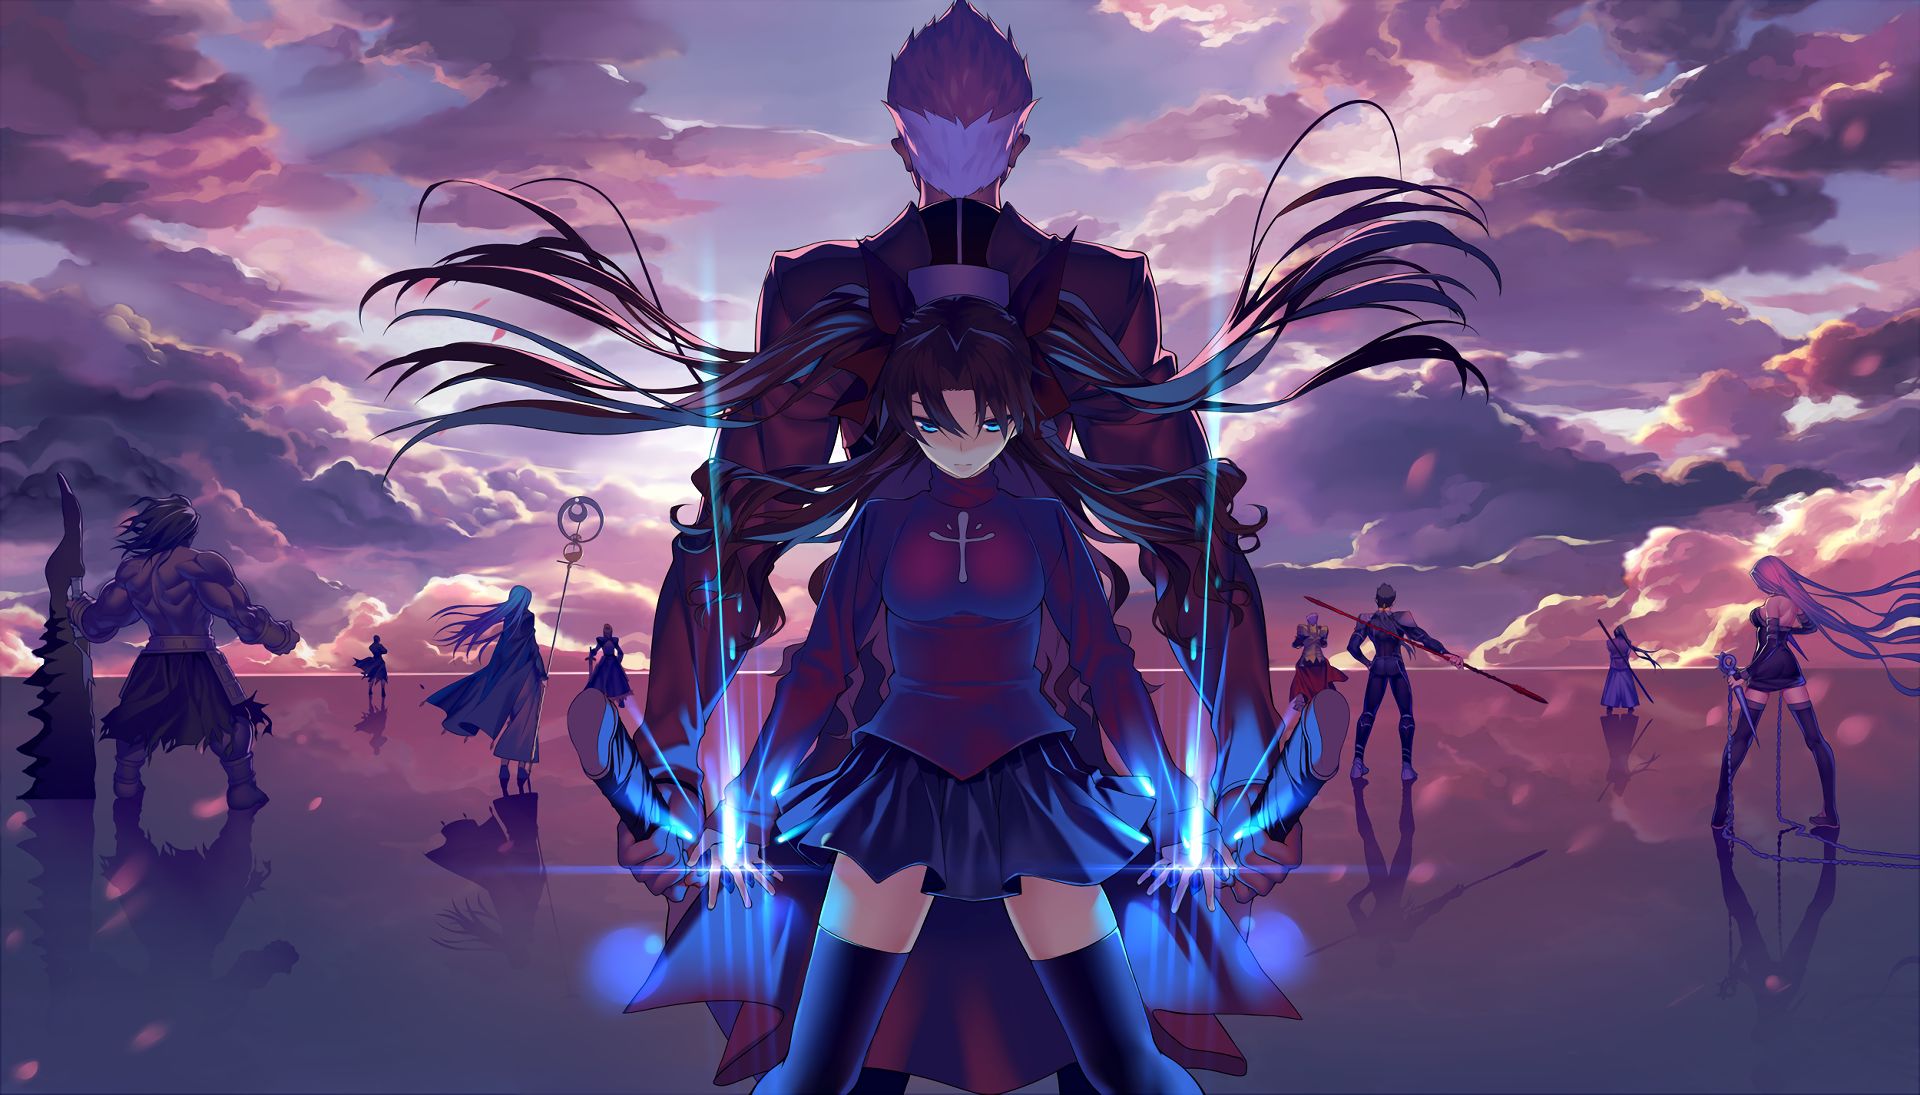 fate series, anime, reflection, fate/stay night: unlimited blade works, archer (fate/stay night), blue eyes, cloud, rin tohsaka, skirt, staff, sword, thigh highs, weapon 1080p